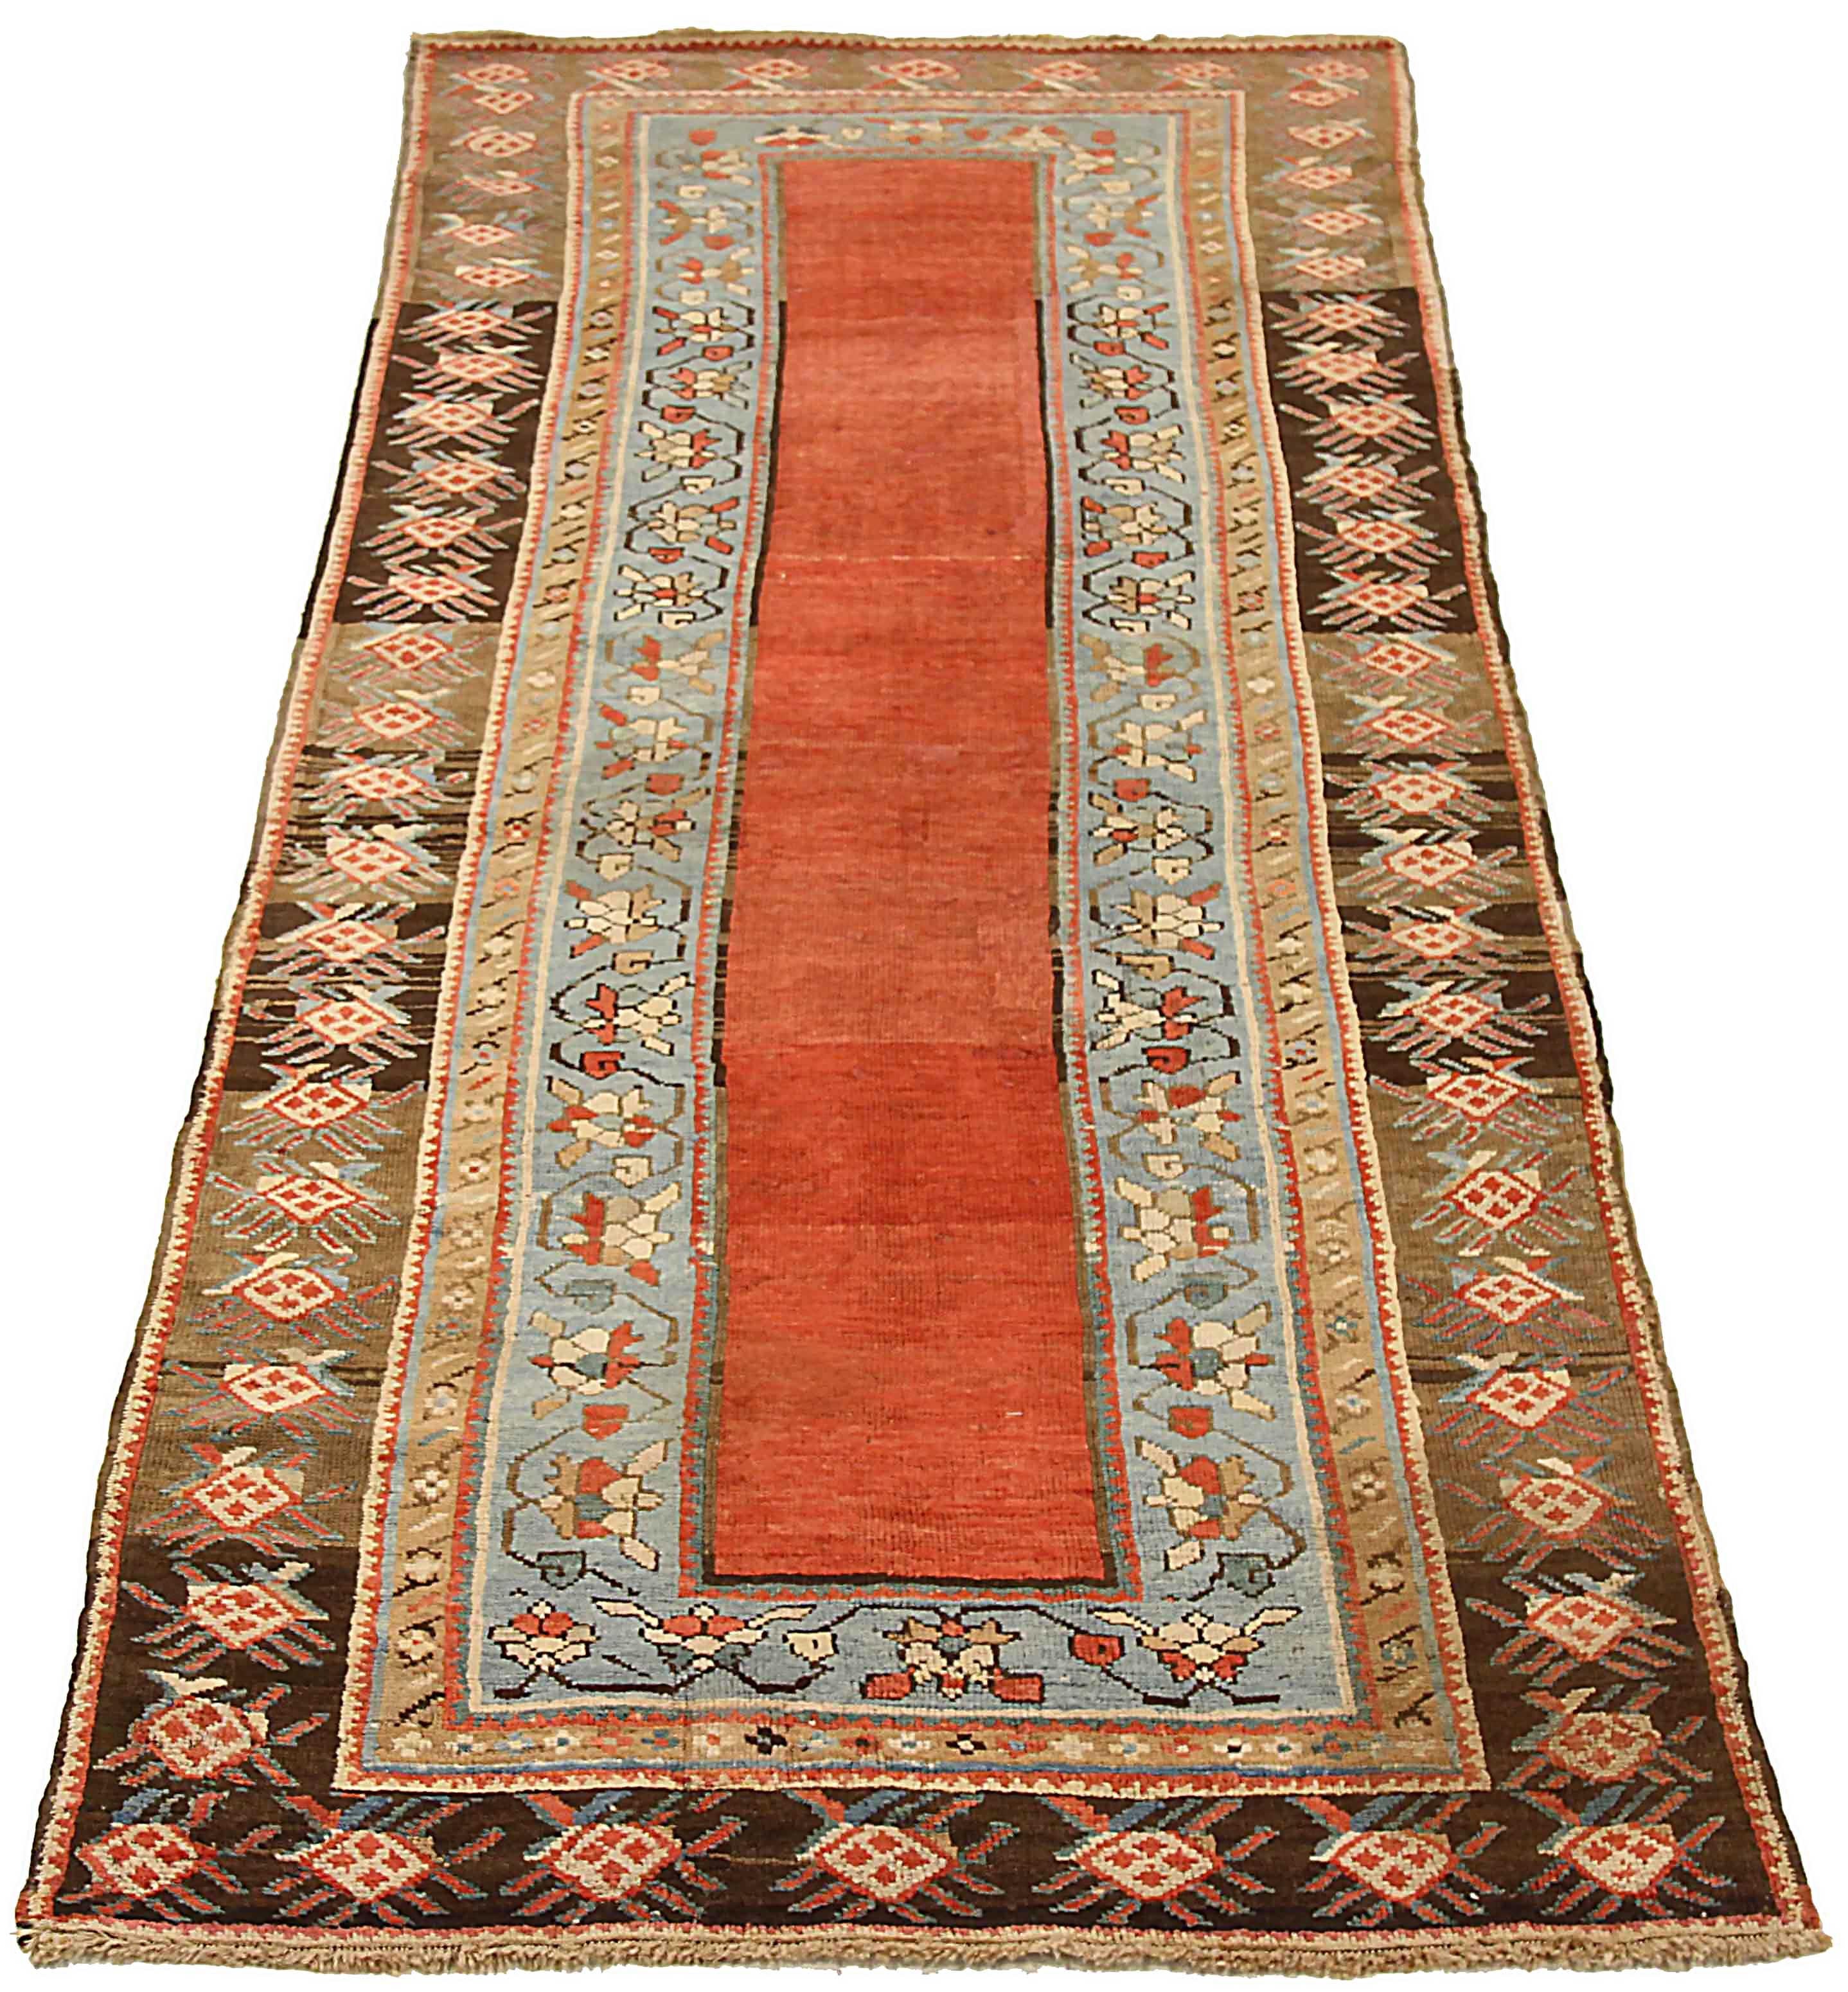 Antique Russian area rug handwoven from the finest sheep’s wool. It’s colored with all-natural vegetable dyes that are safe for humans and pets. It’s a traditional Kazak design handwoven by expert artisans. It’s a lovely area rug that can be